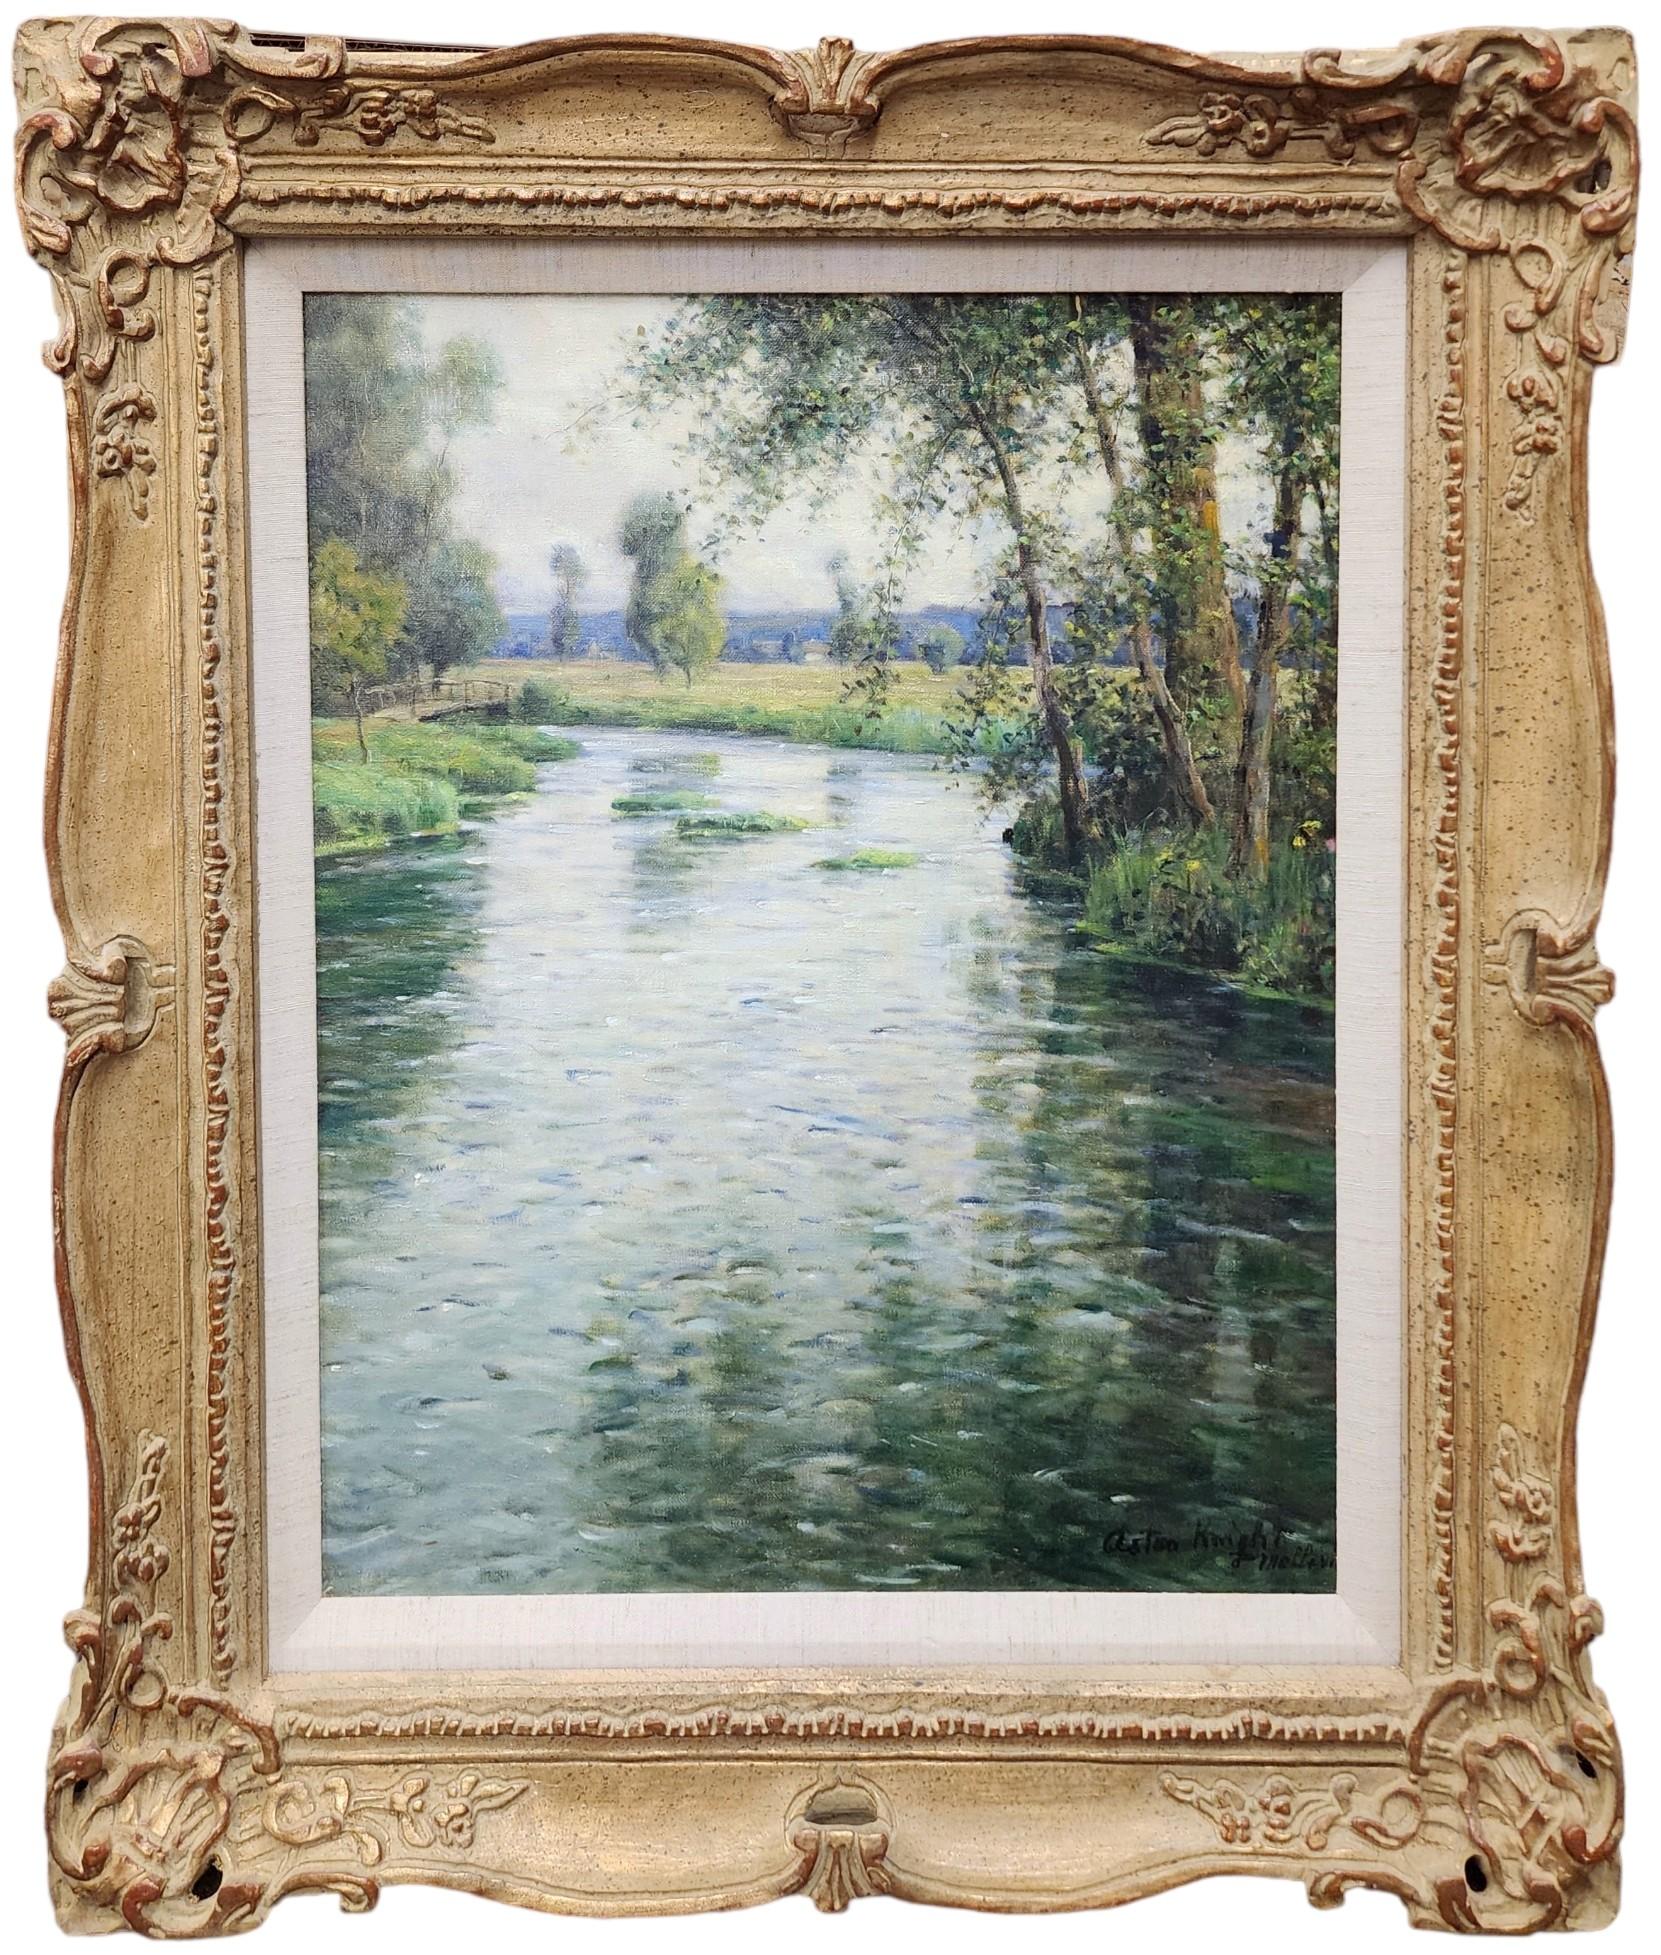 Louis Aston Knight (French/American, 1873-1948)

Signed: Aston Knight (Lower, Right)

" Risle at Melleville ", circa 1920

Oil on Canvas

21 3/4" x 18"

Housed in a 3" Ornamented Frame with a 1" Linen Liner

Overall Size: 29" x 25"
